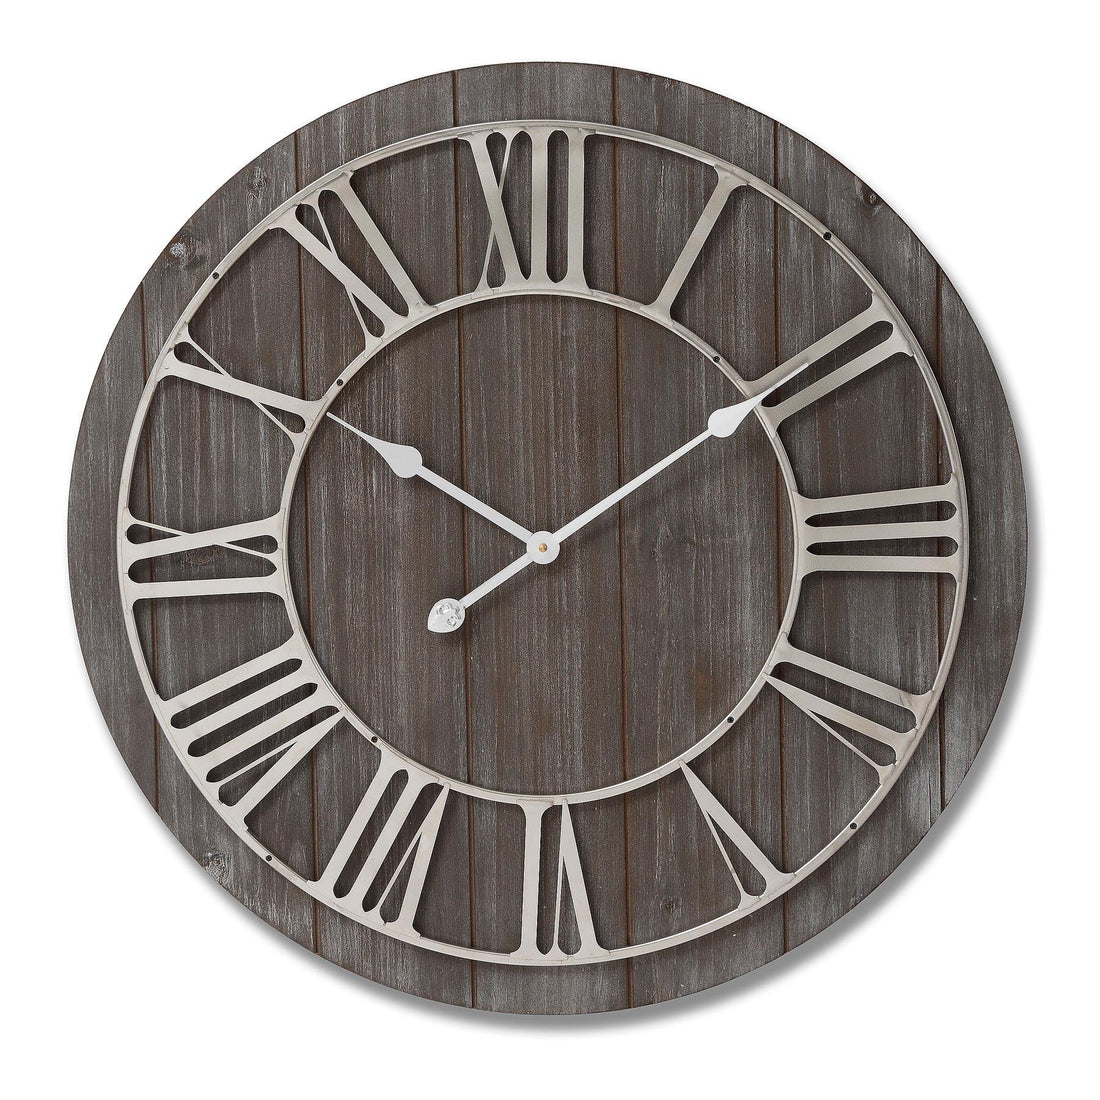 Wooden Clock With Contrasting Nickel Detail - £129.95 - Wall Clocks 